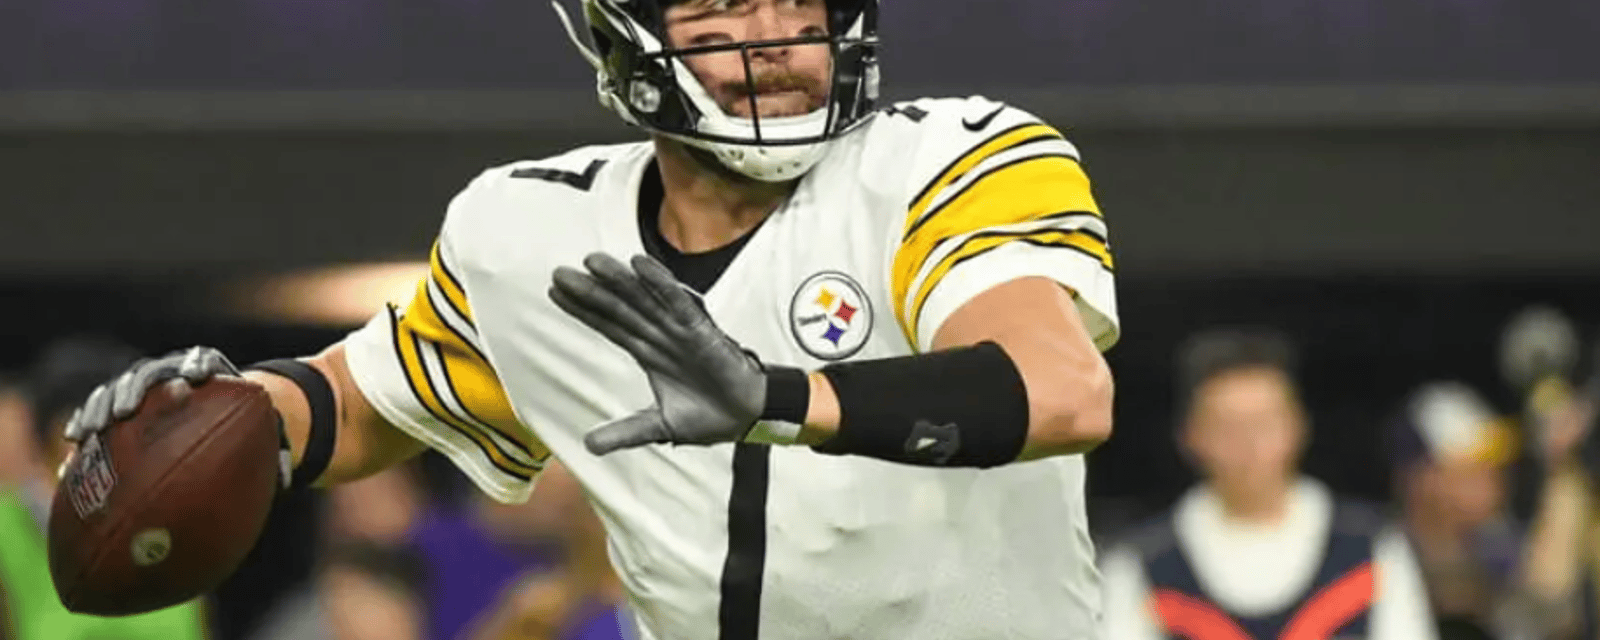 Ben Roethlisberger calls out Steelers coach Mike Tomlin